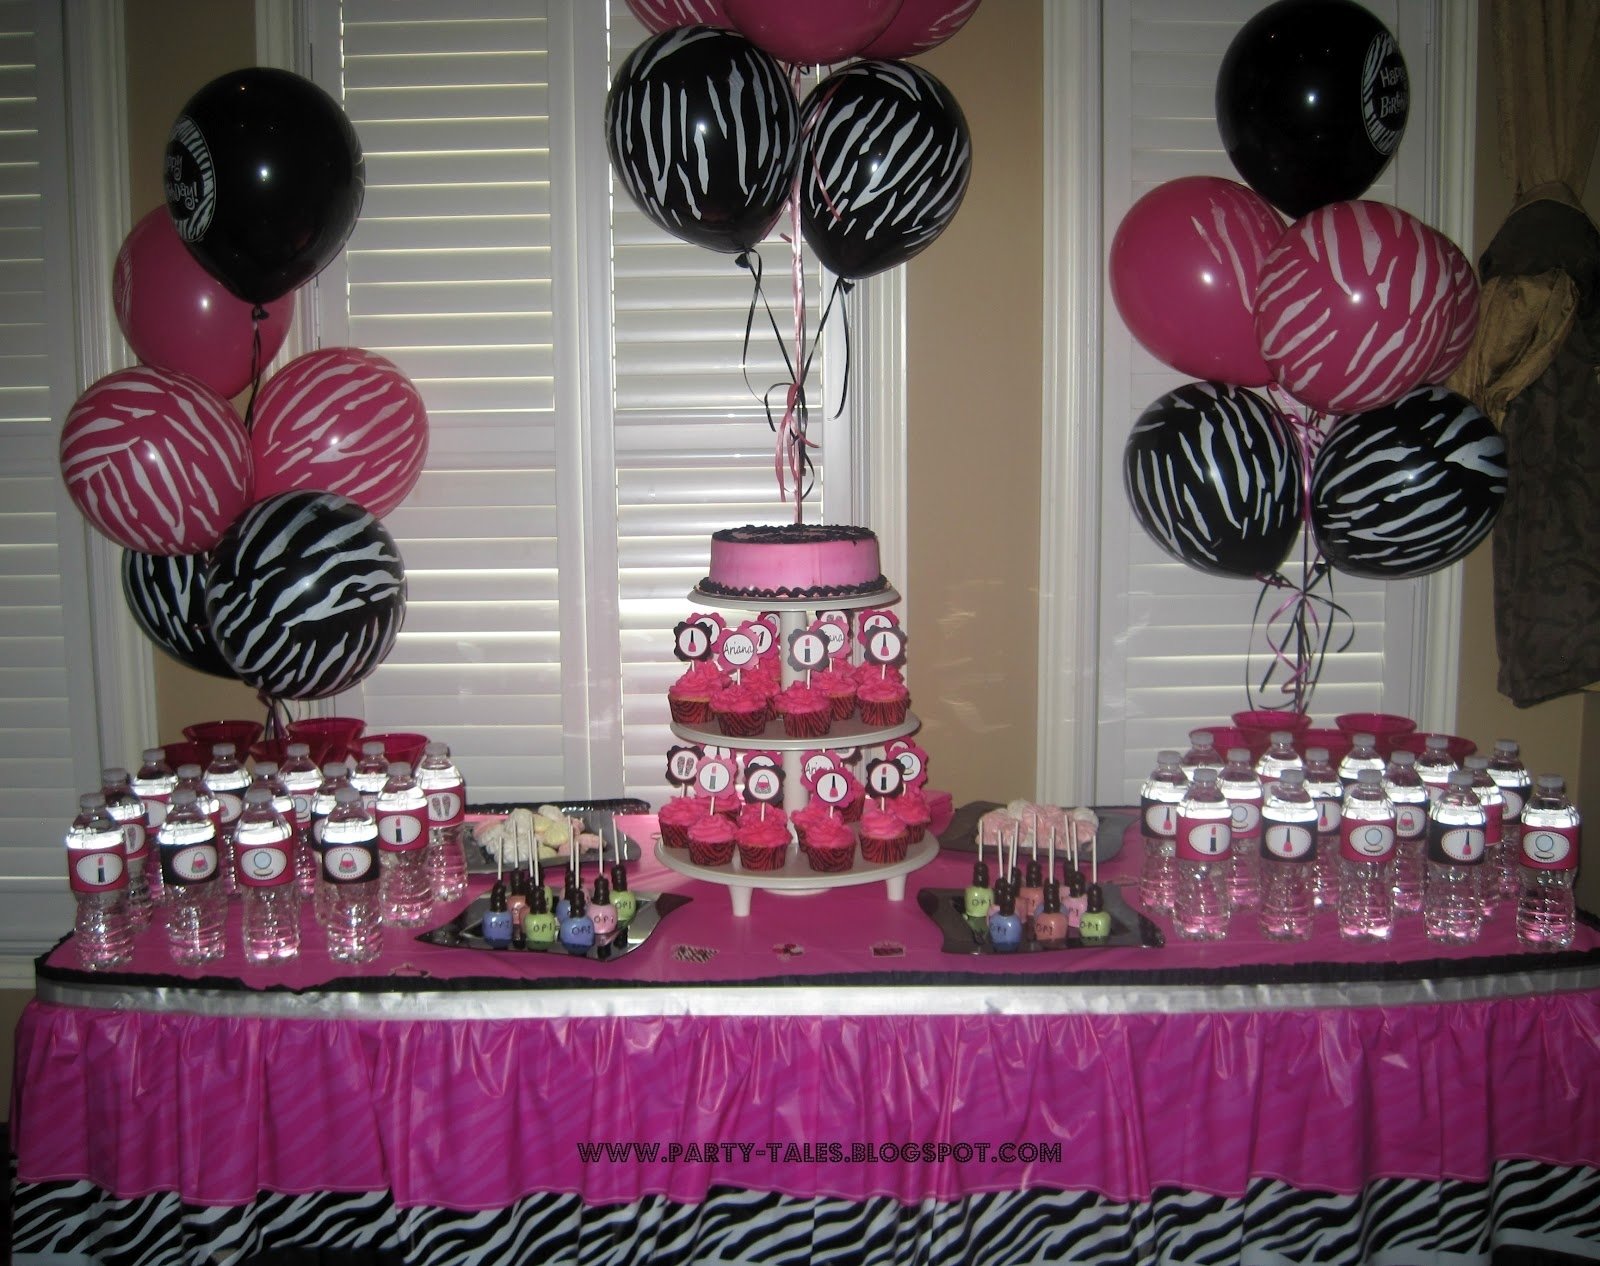 10 Beautiful Pink And Black Birthday Party Ideas party tales birthday party zebra print and hot pink diva spa 4 2022